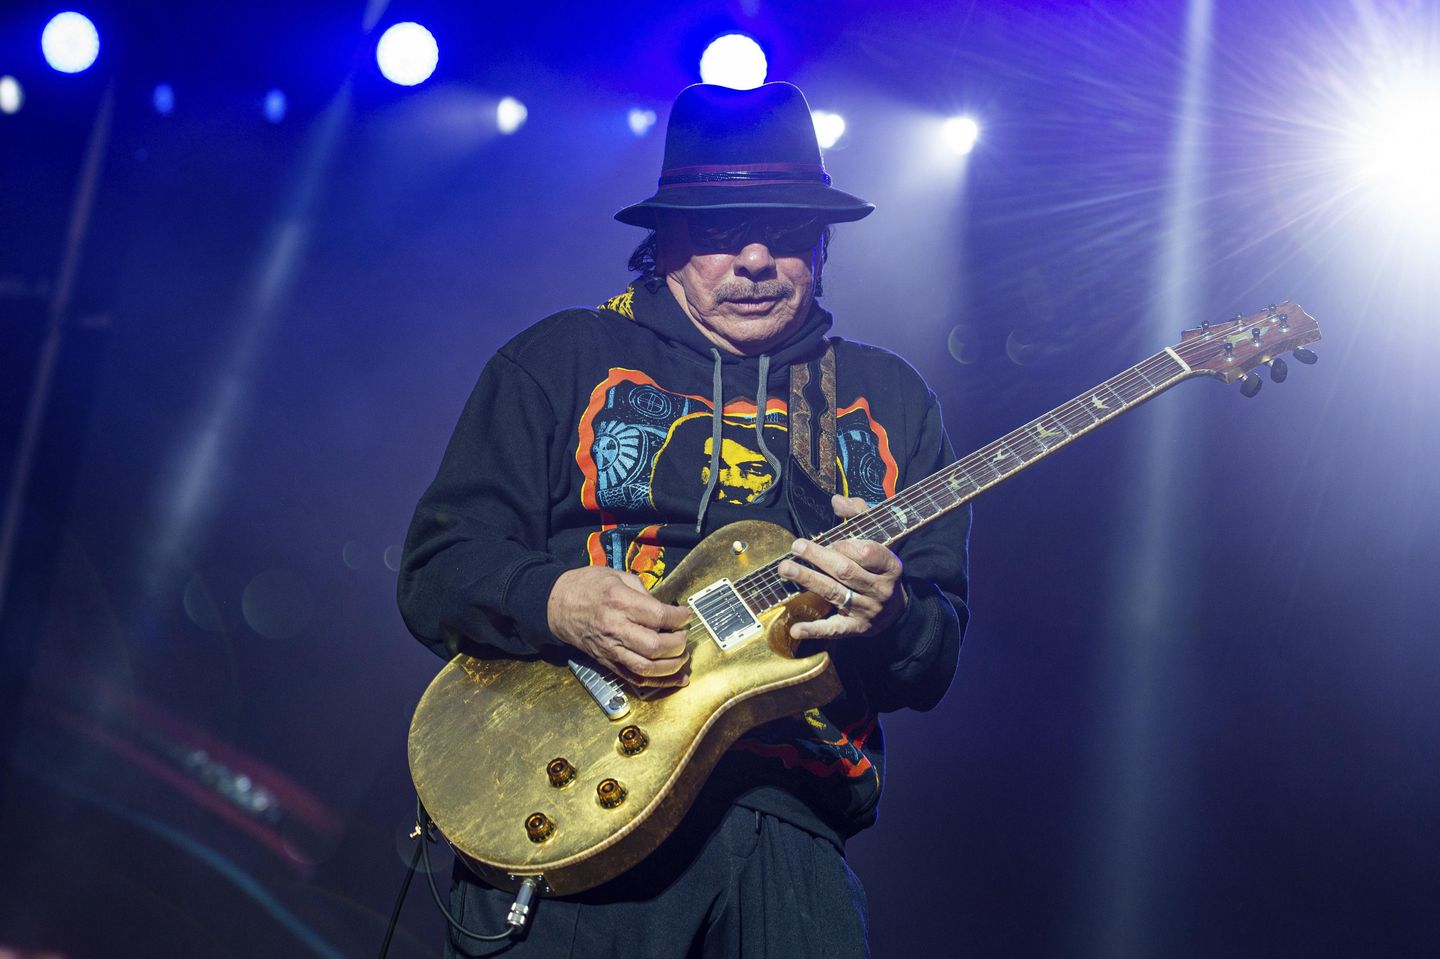 Carlos Santana apologizes for gender comment made at concert, then deletes and reposts new note